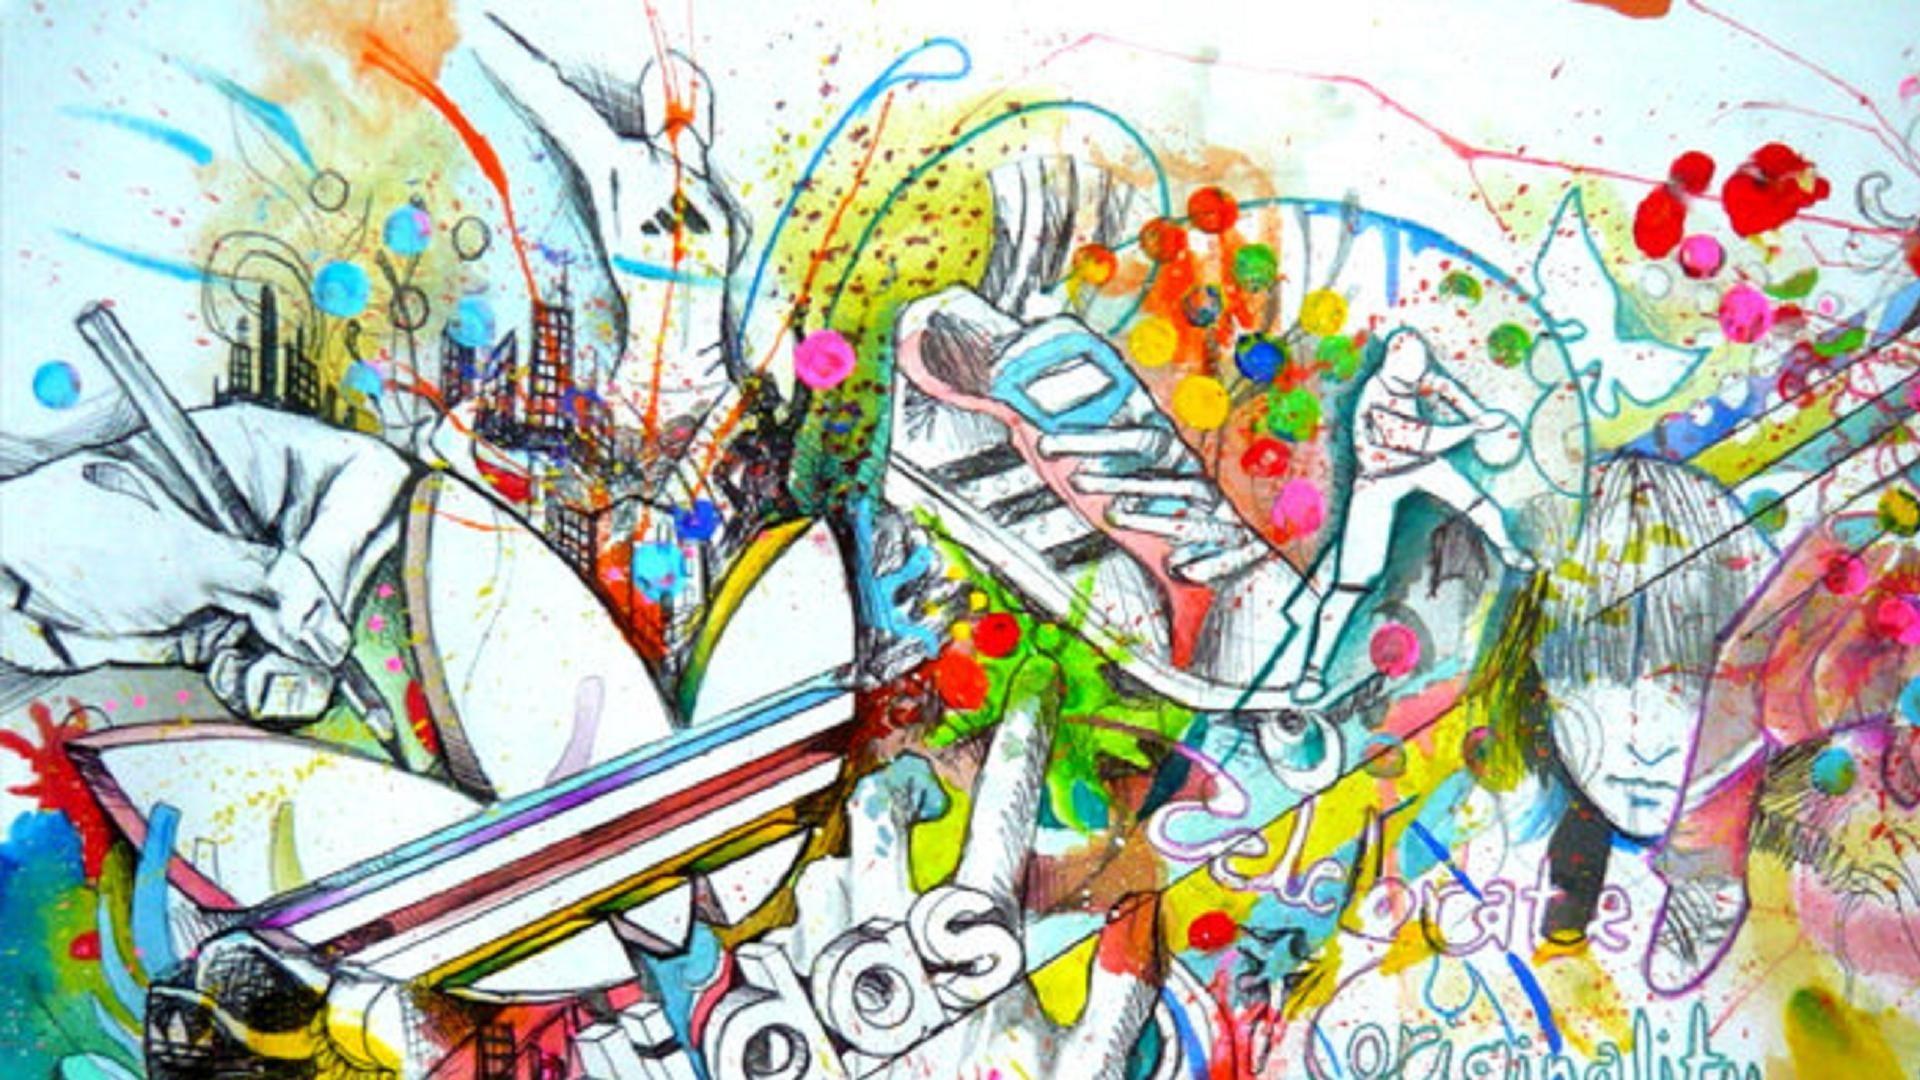 Nike Shoes Live Wallpaper on Graffiti Background - free download